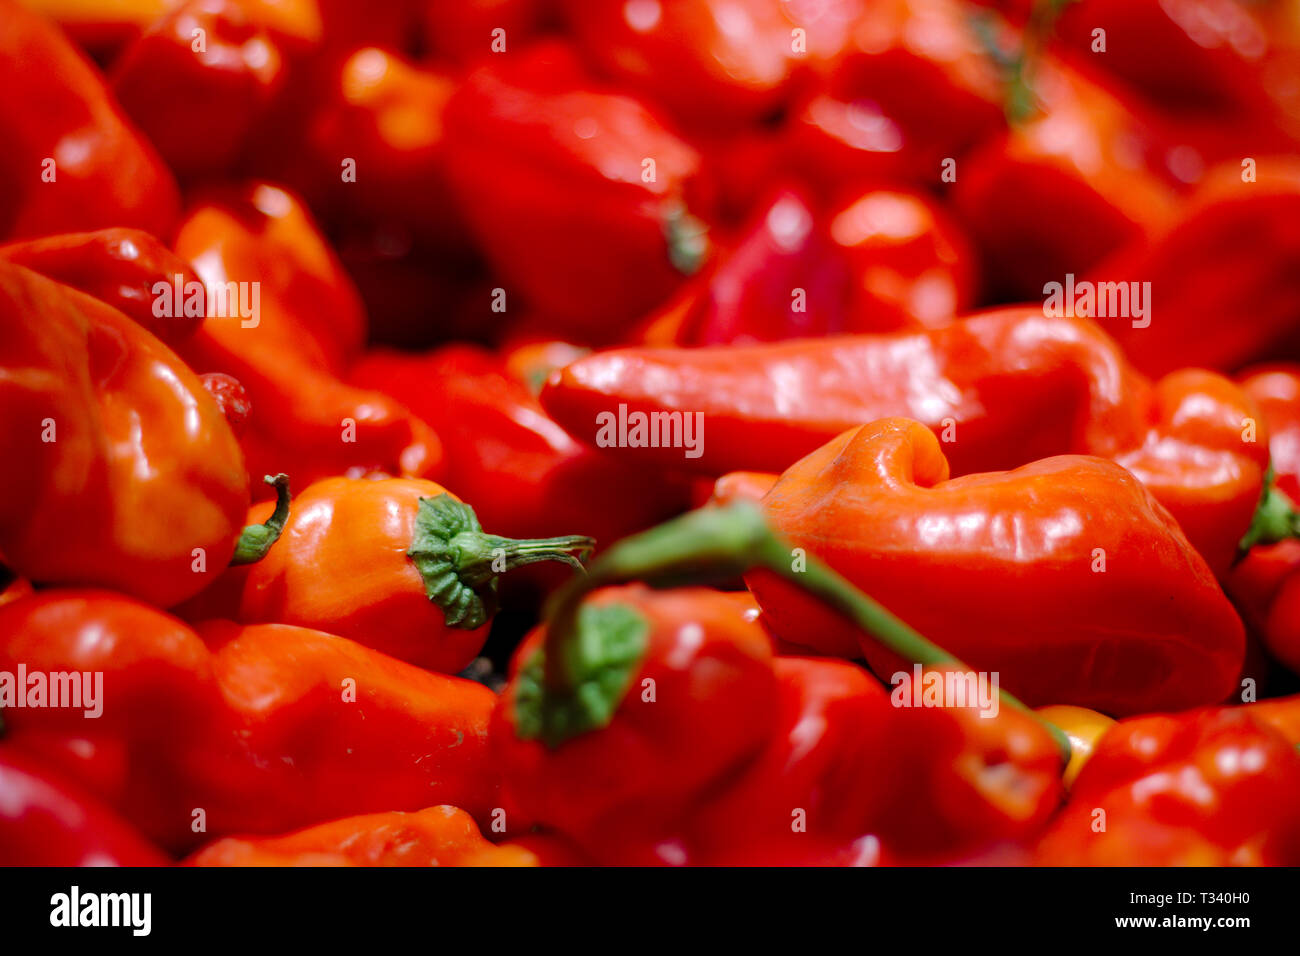 Red chilis at a supermarket. Stock Photo